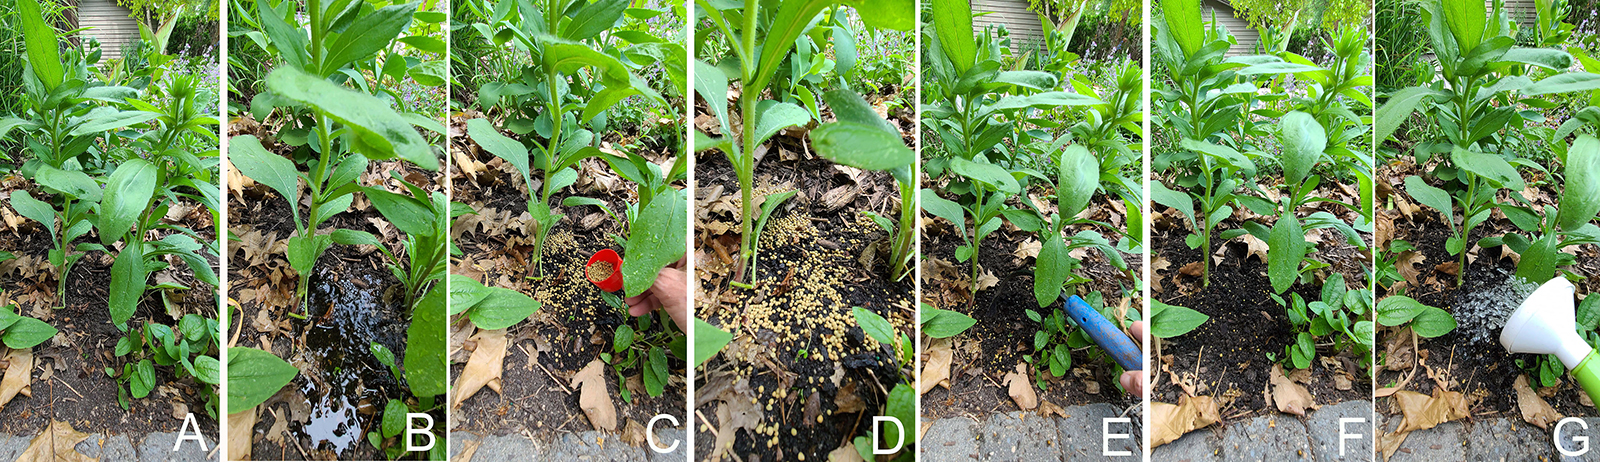 Collage of 7 photos of green plants in a garden bed showing how granular fertilizer is incorporated into the soil and plants are watered.